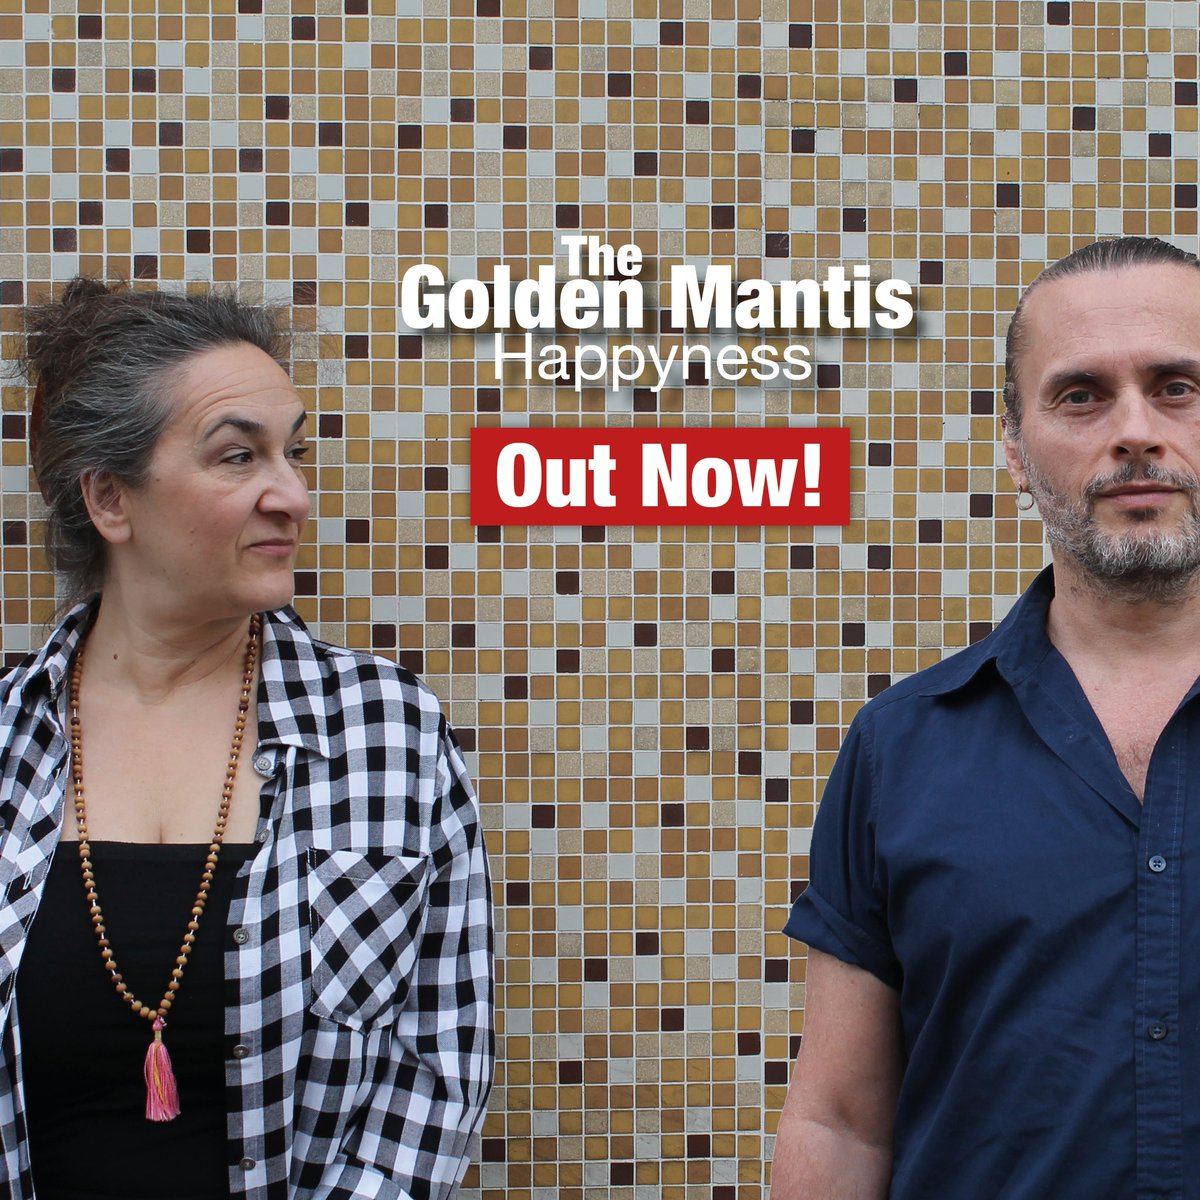 Our new song Happyness is now available on any streaming platform of your choice. Check it out, guys! #thegoldenmantis #newsong #happyness #indiemusic #indie #indierock #indiepop #newmusic #singersongwriter @dorner_martina @Chenel_No1 @ShaneLarmand @Portob_Express @NathalieWeider